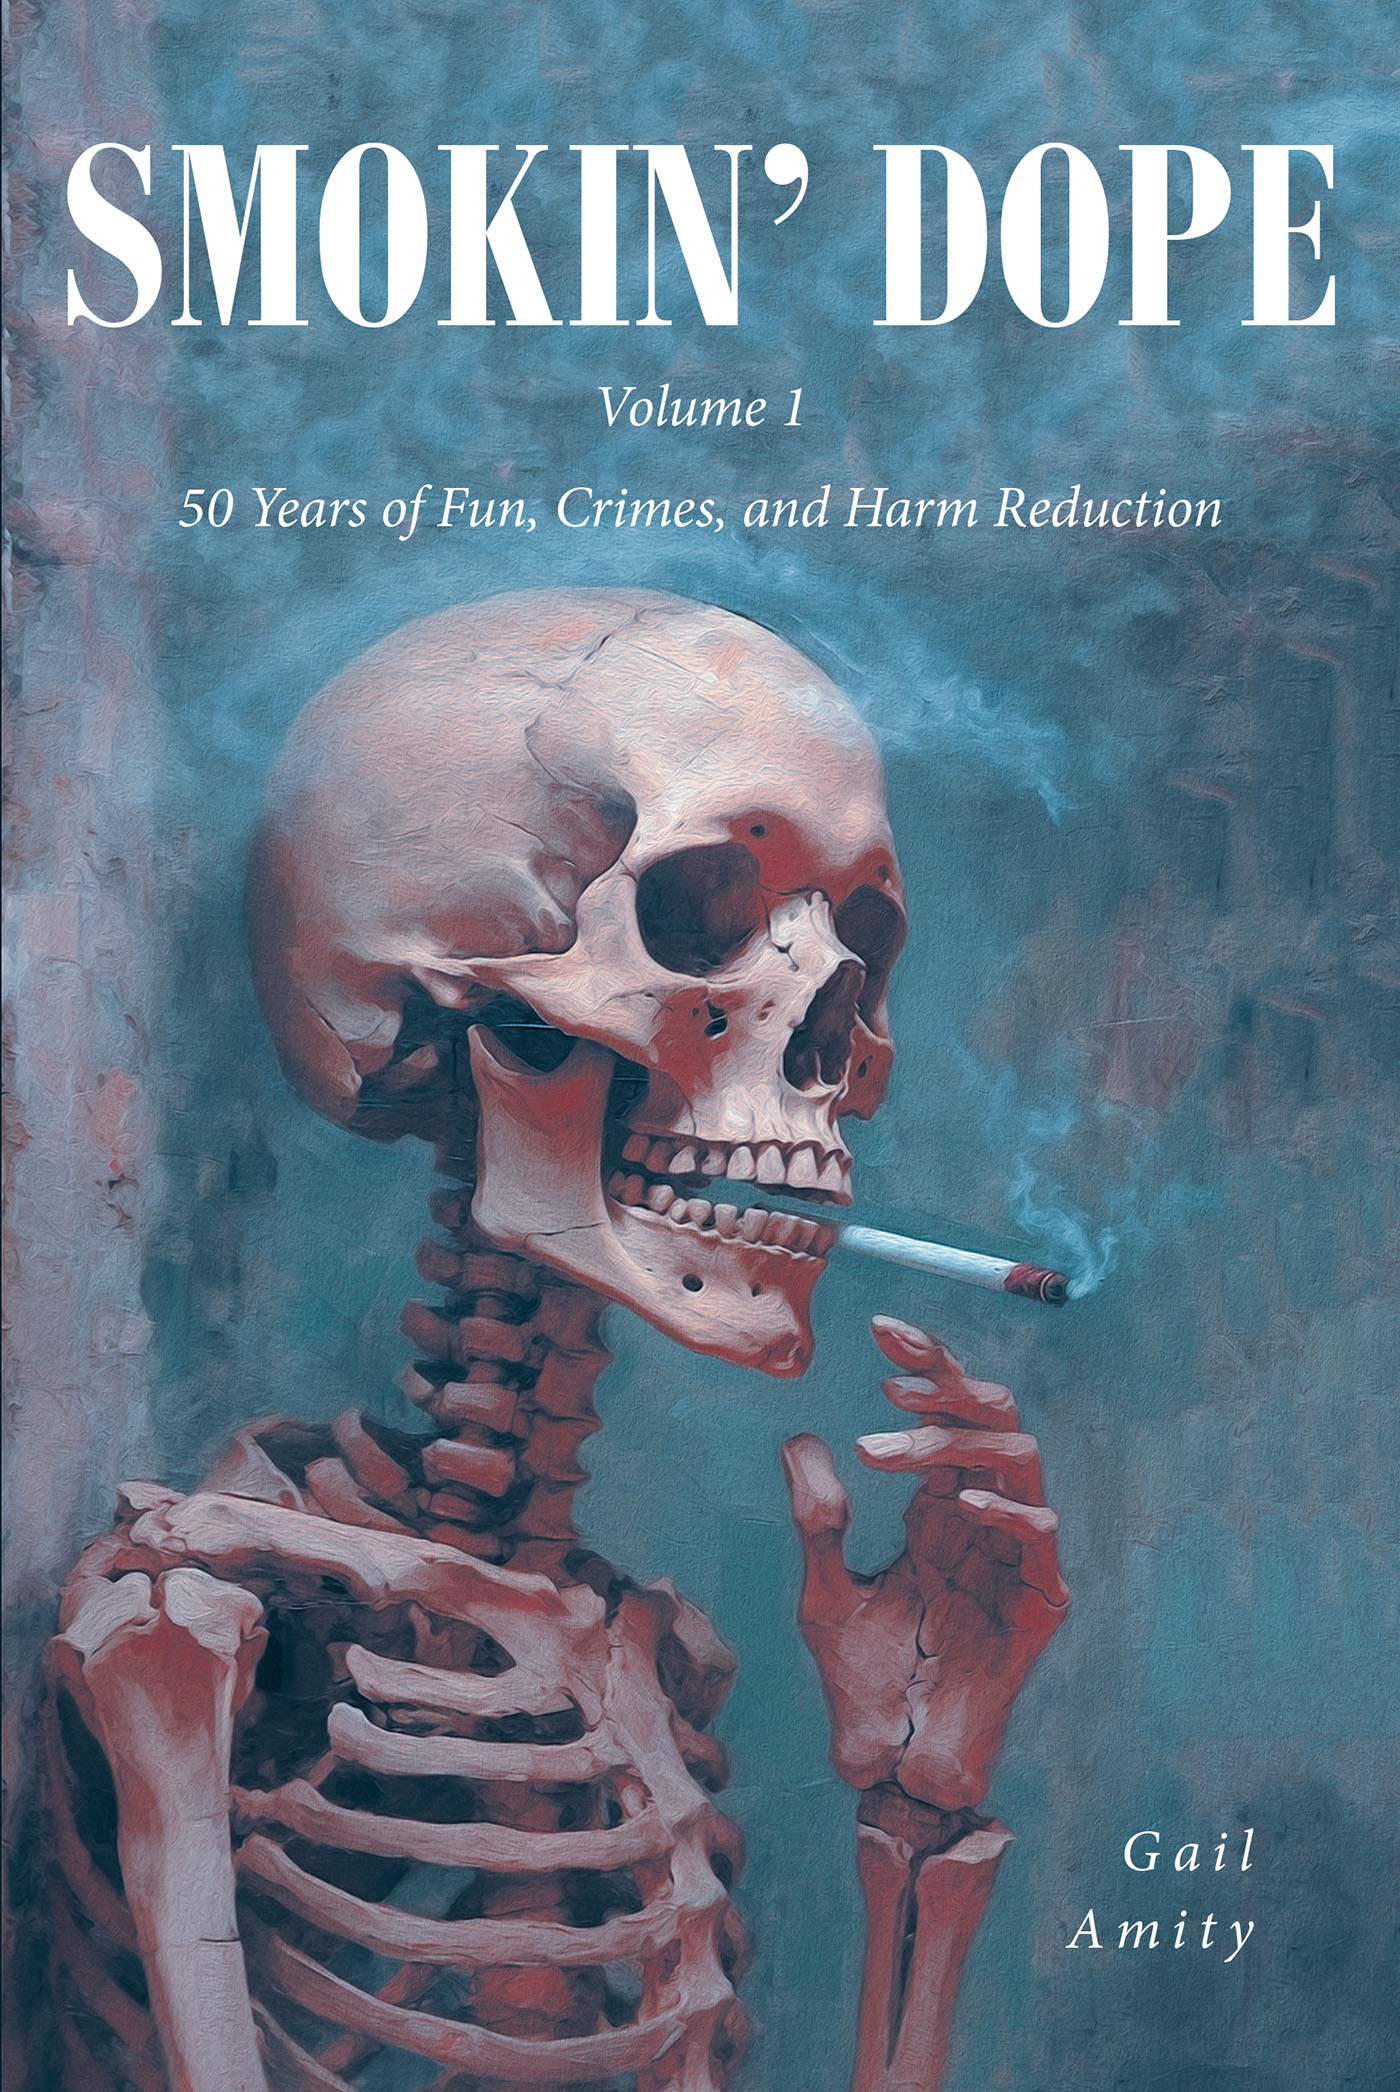 Gail Amity’s New Book, “Smokin' Dope: 50 Years of Fun, Crimes, and Harm Reduction,” Documents the Author’s Efforts to Reduce Any Harm to Her Health While Using Cannabis